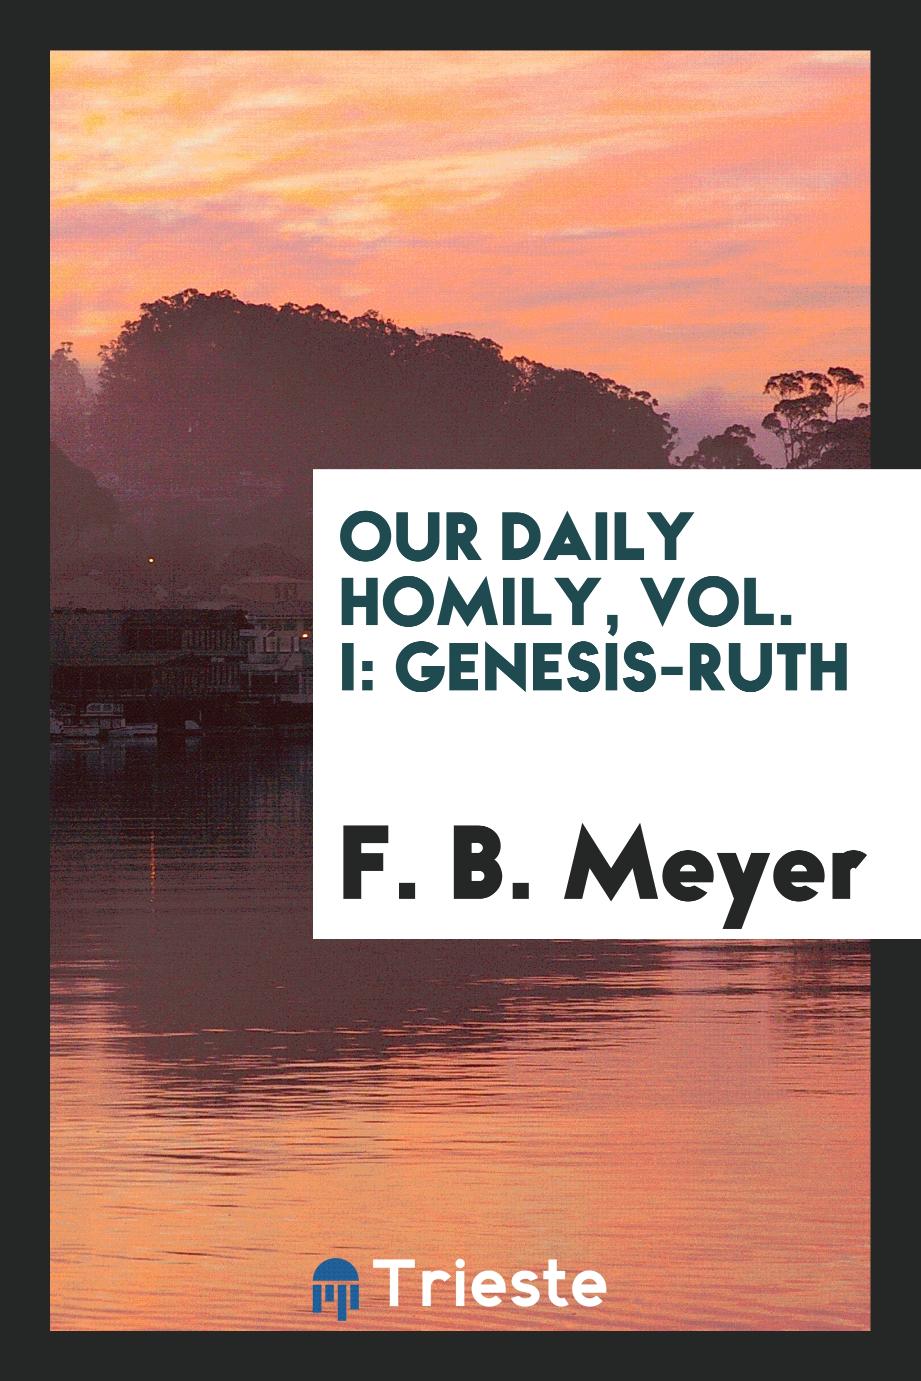 Our daily homily, Vol. I: Genesis-Ruth